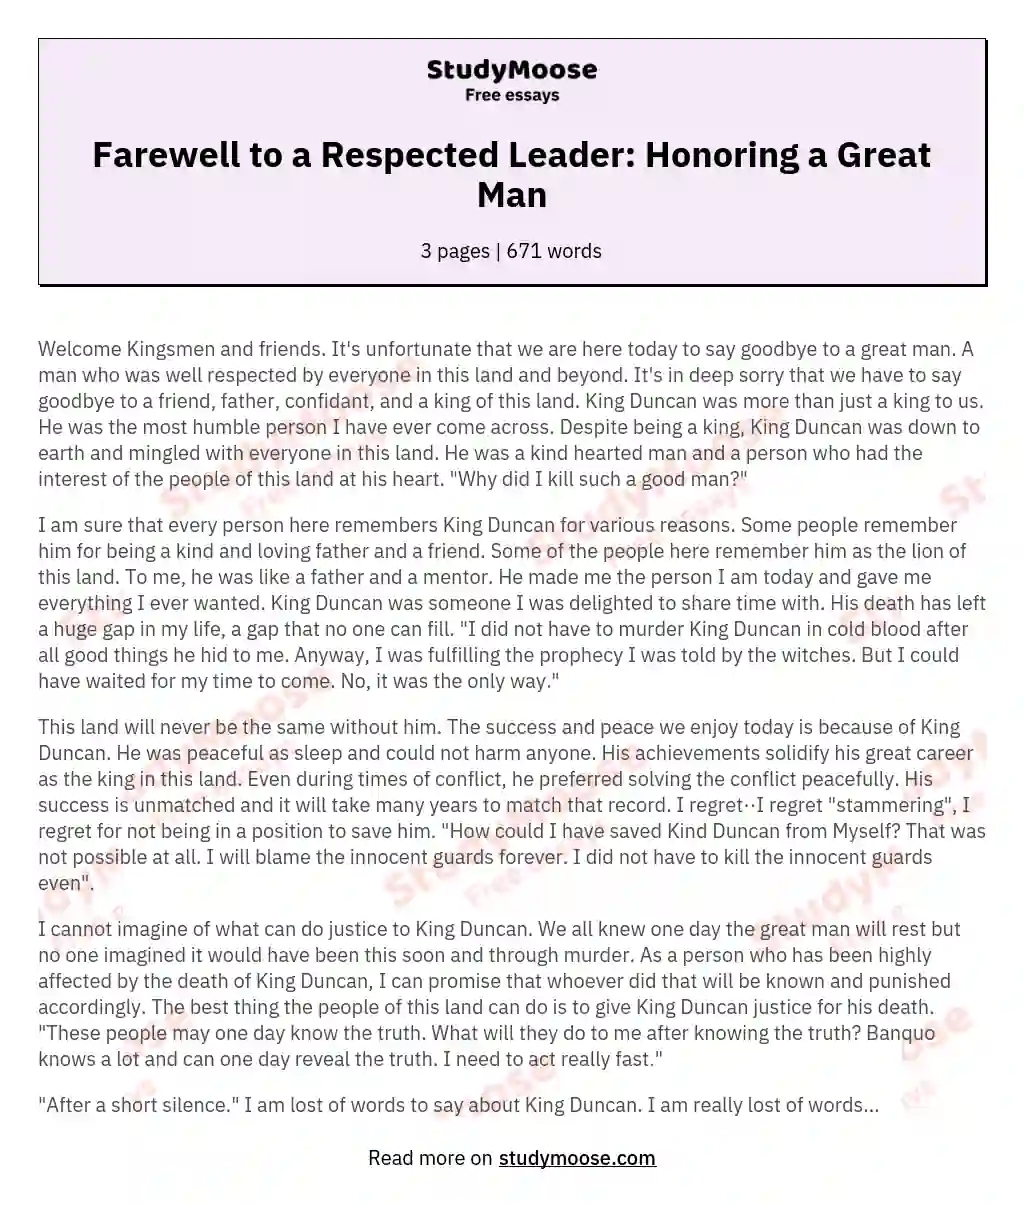 Farewell to a Respected Leader: Honoring a Great Man essay